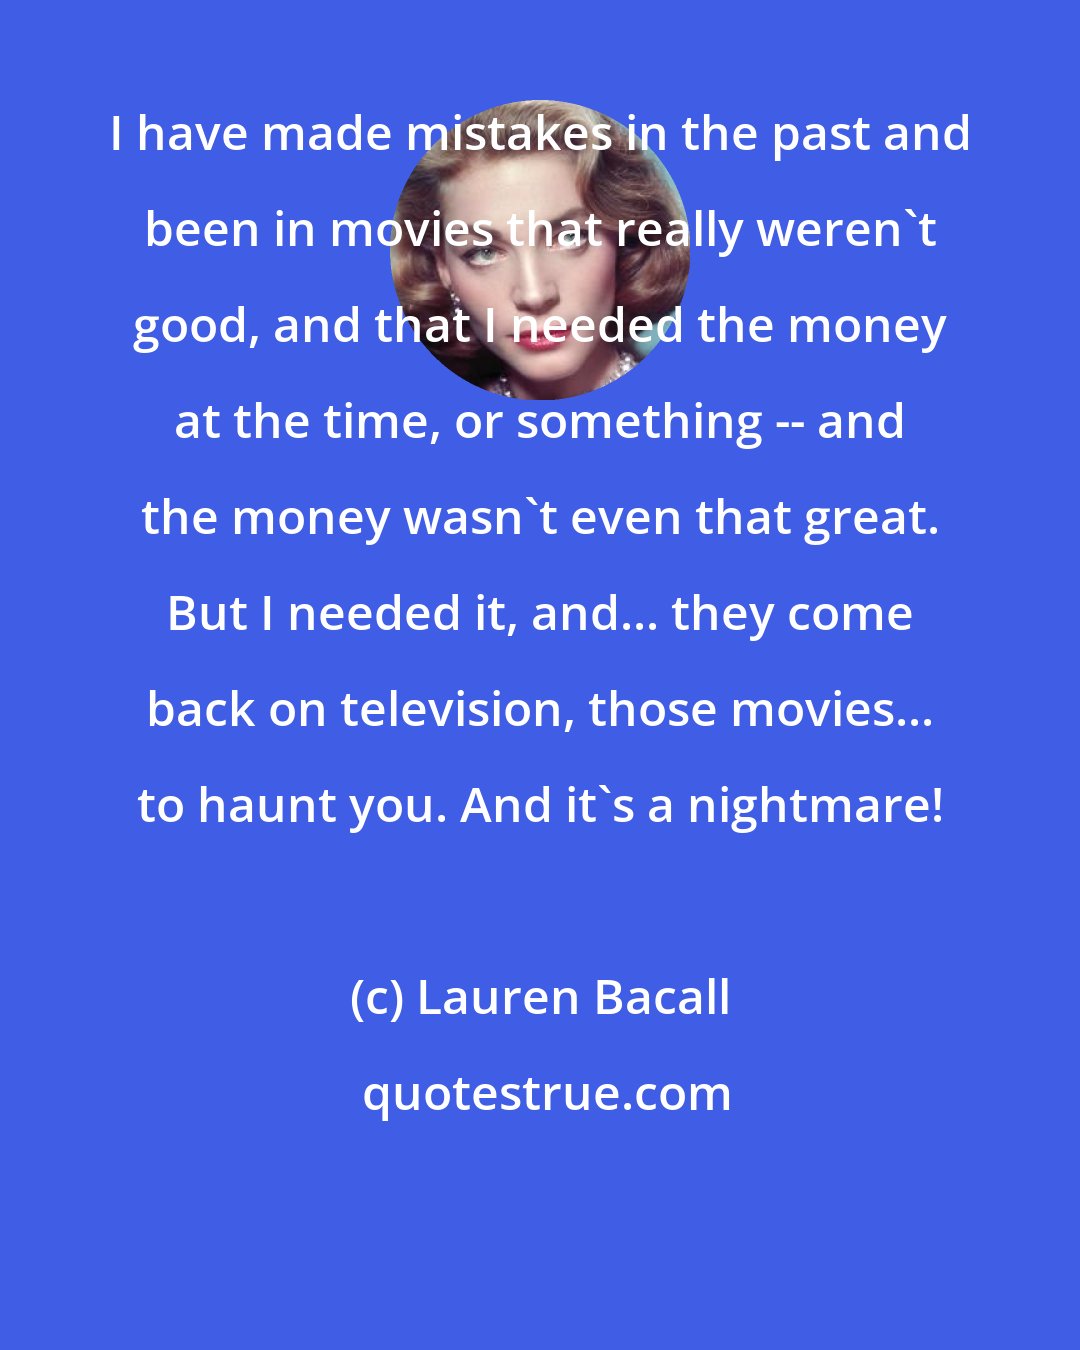 Lauren Bacall: I have made mistakes in the past and been in movies that really weren't good, and that I needed the money at the time, or something -- and the money wasn't even that great. But I needed it, and... they come back on television, those movies... to haunt you. And it's a nightmare!